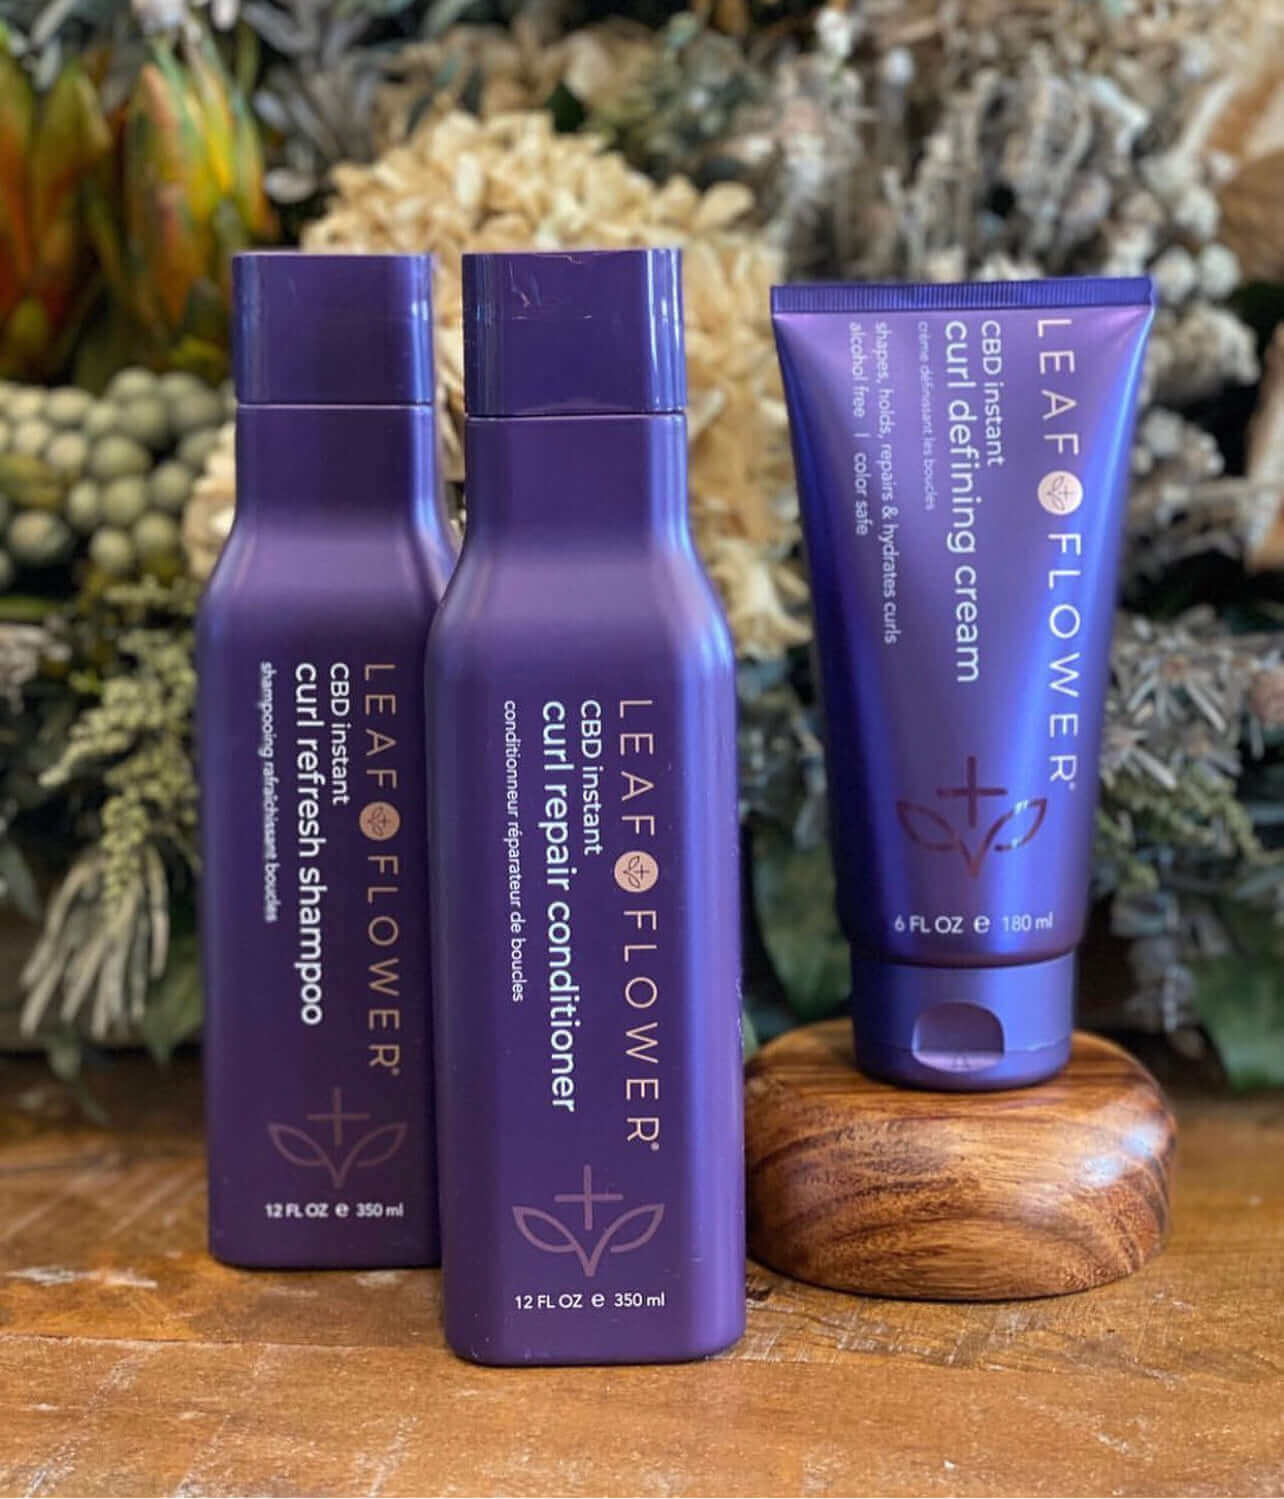 Three Leaf and Flower hair care products, including shampoo, Leaf and Flower Instant Curl Repair Conditioner, and curling cream for all curl types, displayed against a floral backdrop.